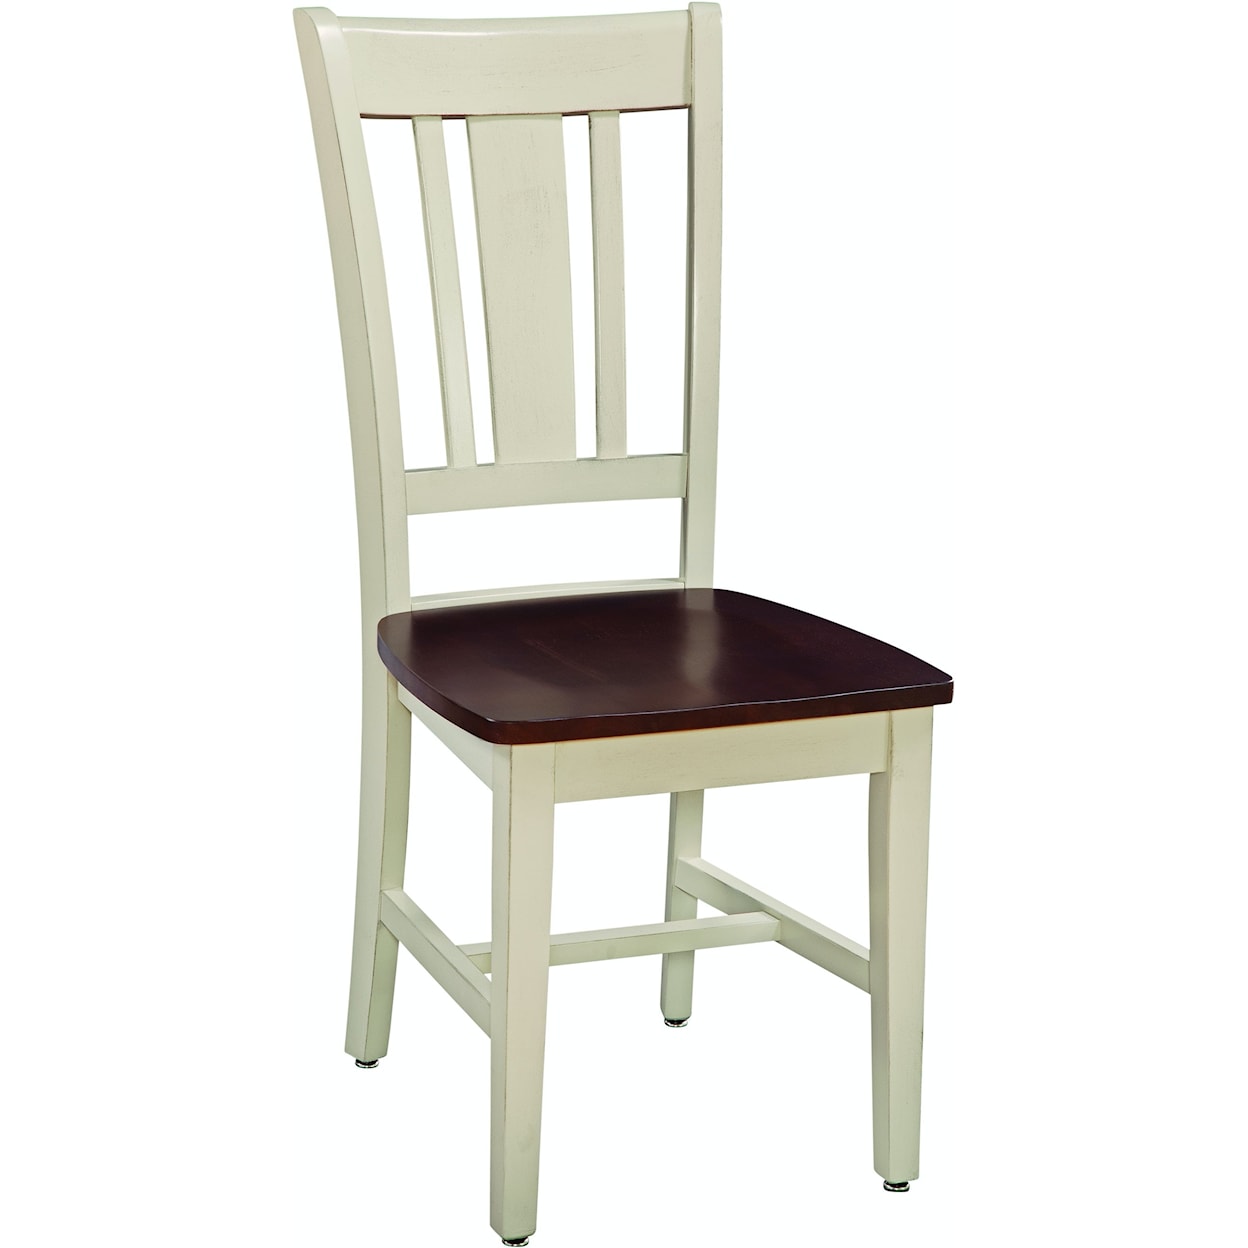 John Thomas Dining Essentials San Remo Dining Chair in Expresso / Almond